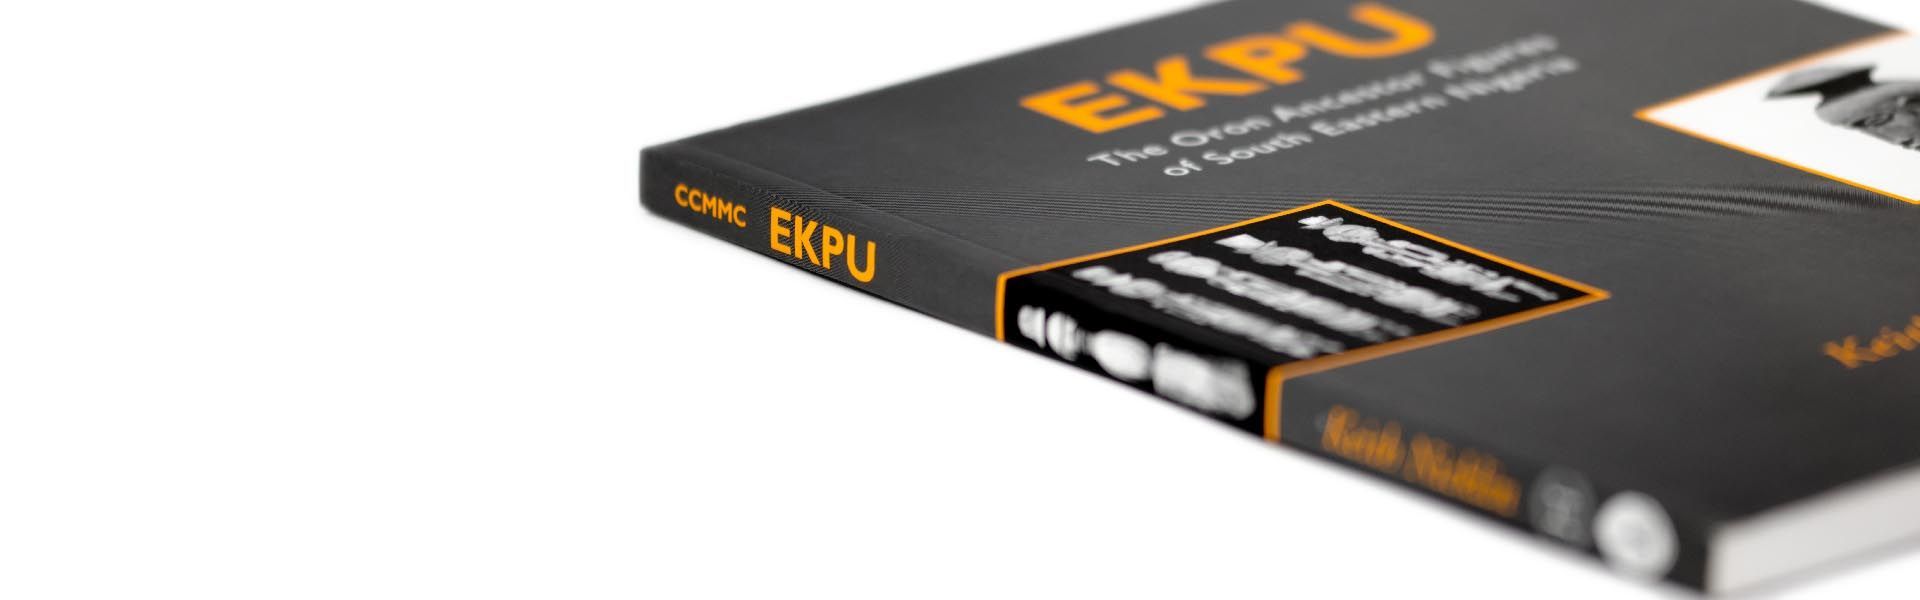 a black book titled ekpu the iron ancestor figures of south eastern nigeria sits on a white surface